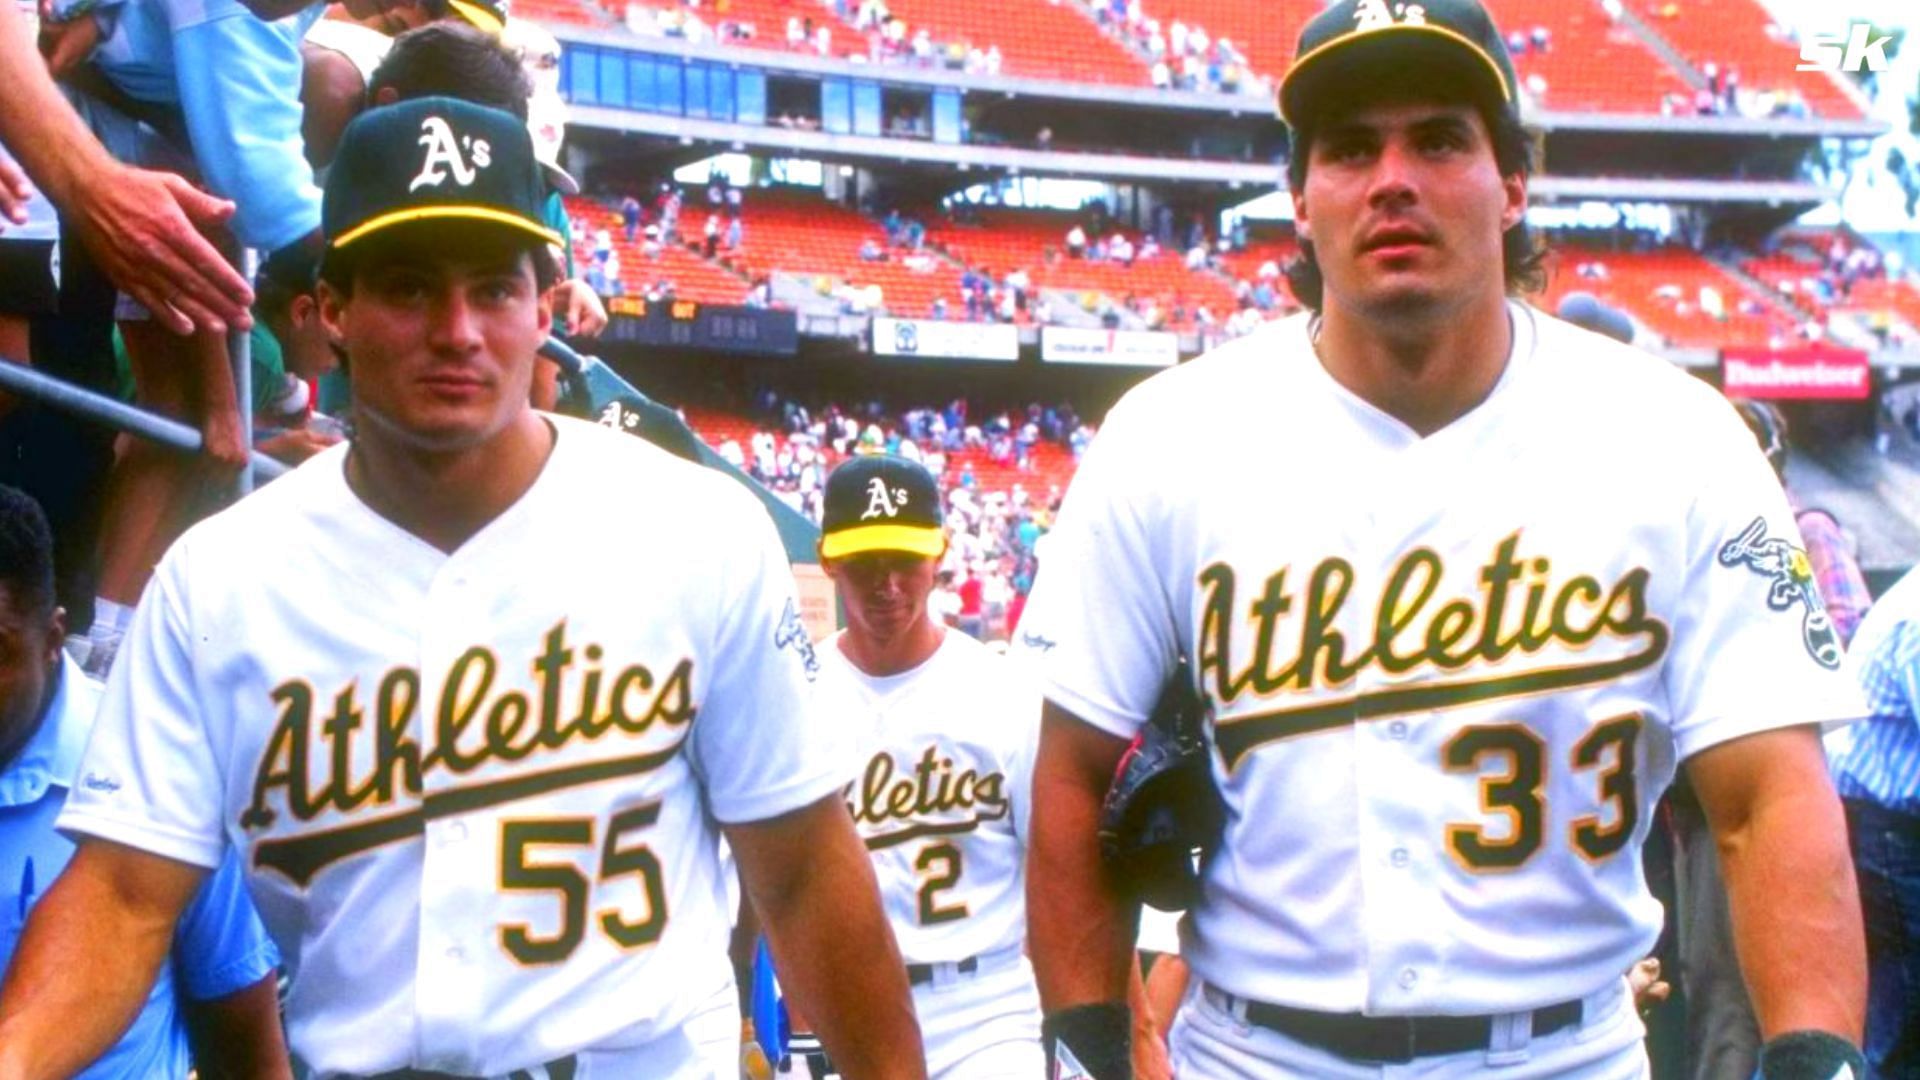 1990: THE CANSECO TWINS, OZZIE, LEFT, AND JOSE, WALK OFF THE FIELD AFTER THE OAKLAND A